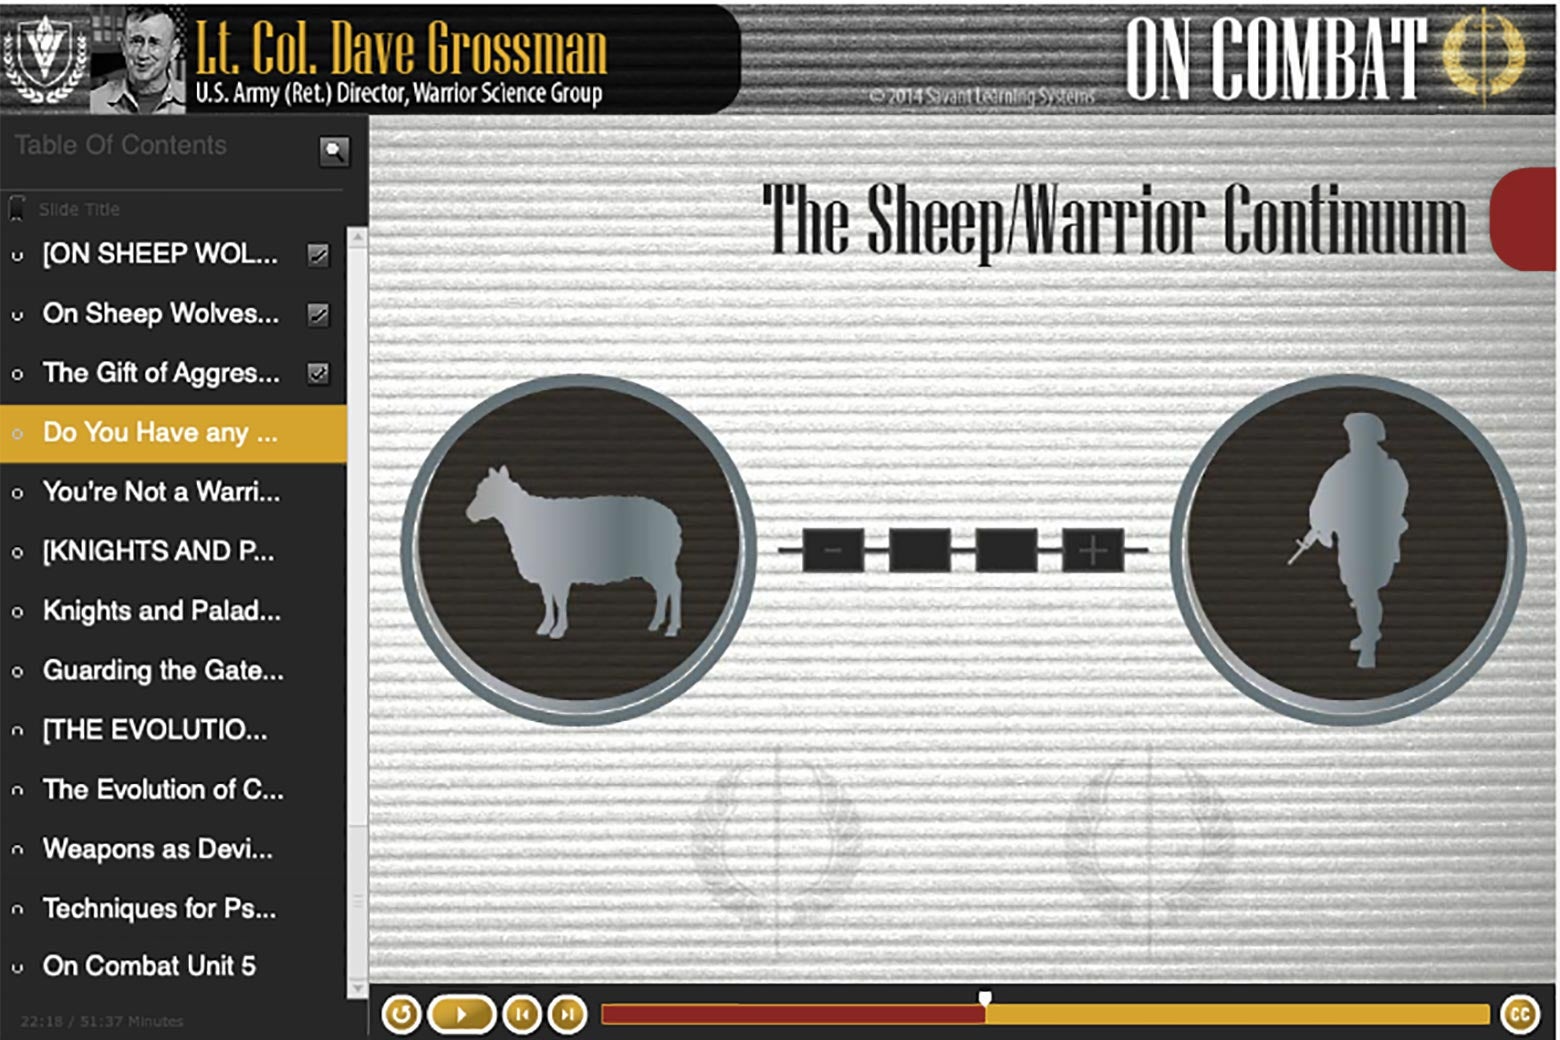 A picture of a slide titled, "The Sheep/Warrior Continuum" with images of a sheep and a soldier.